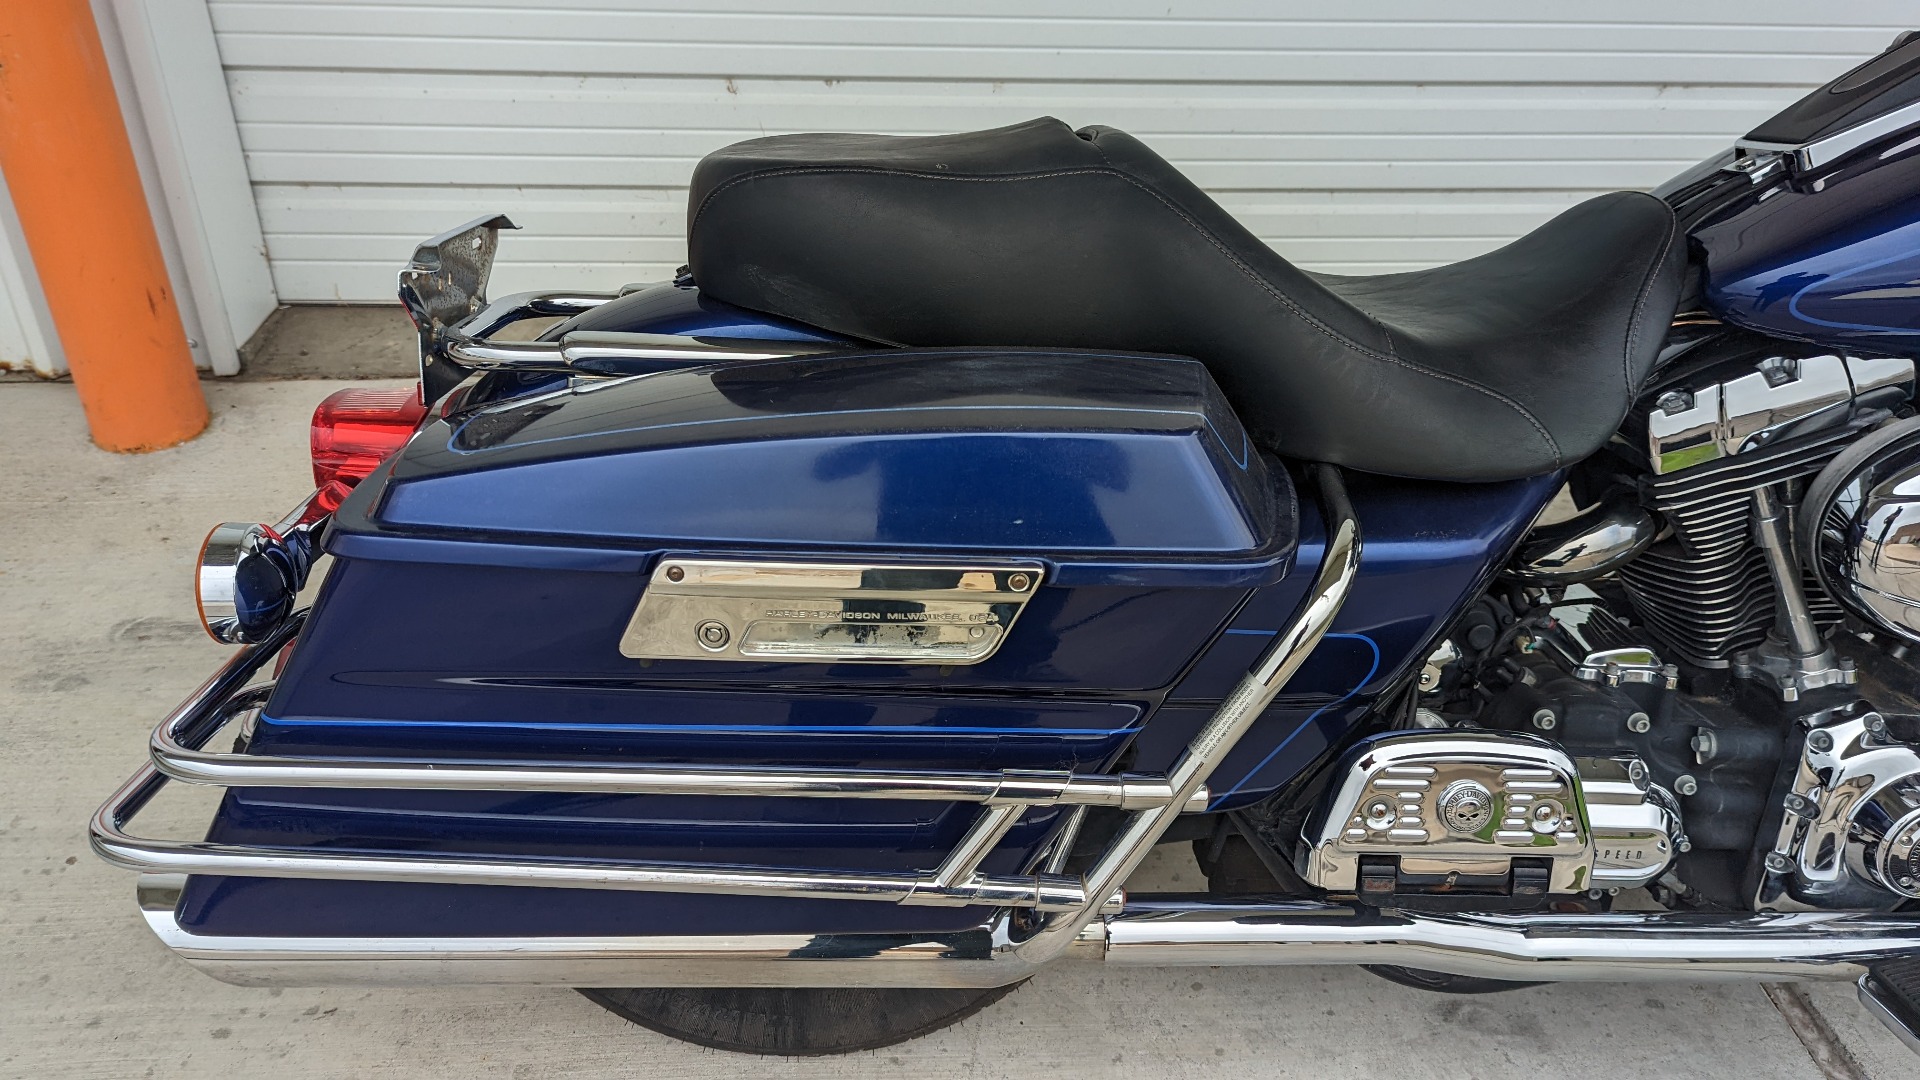 harley electra glide for sale - Photo 5